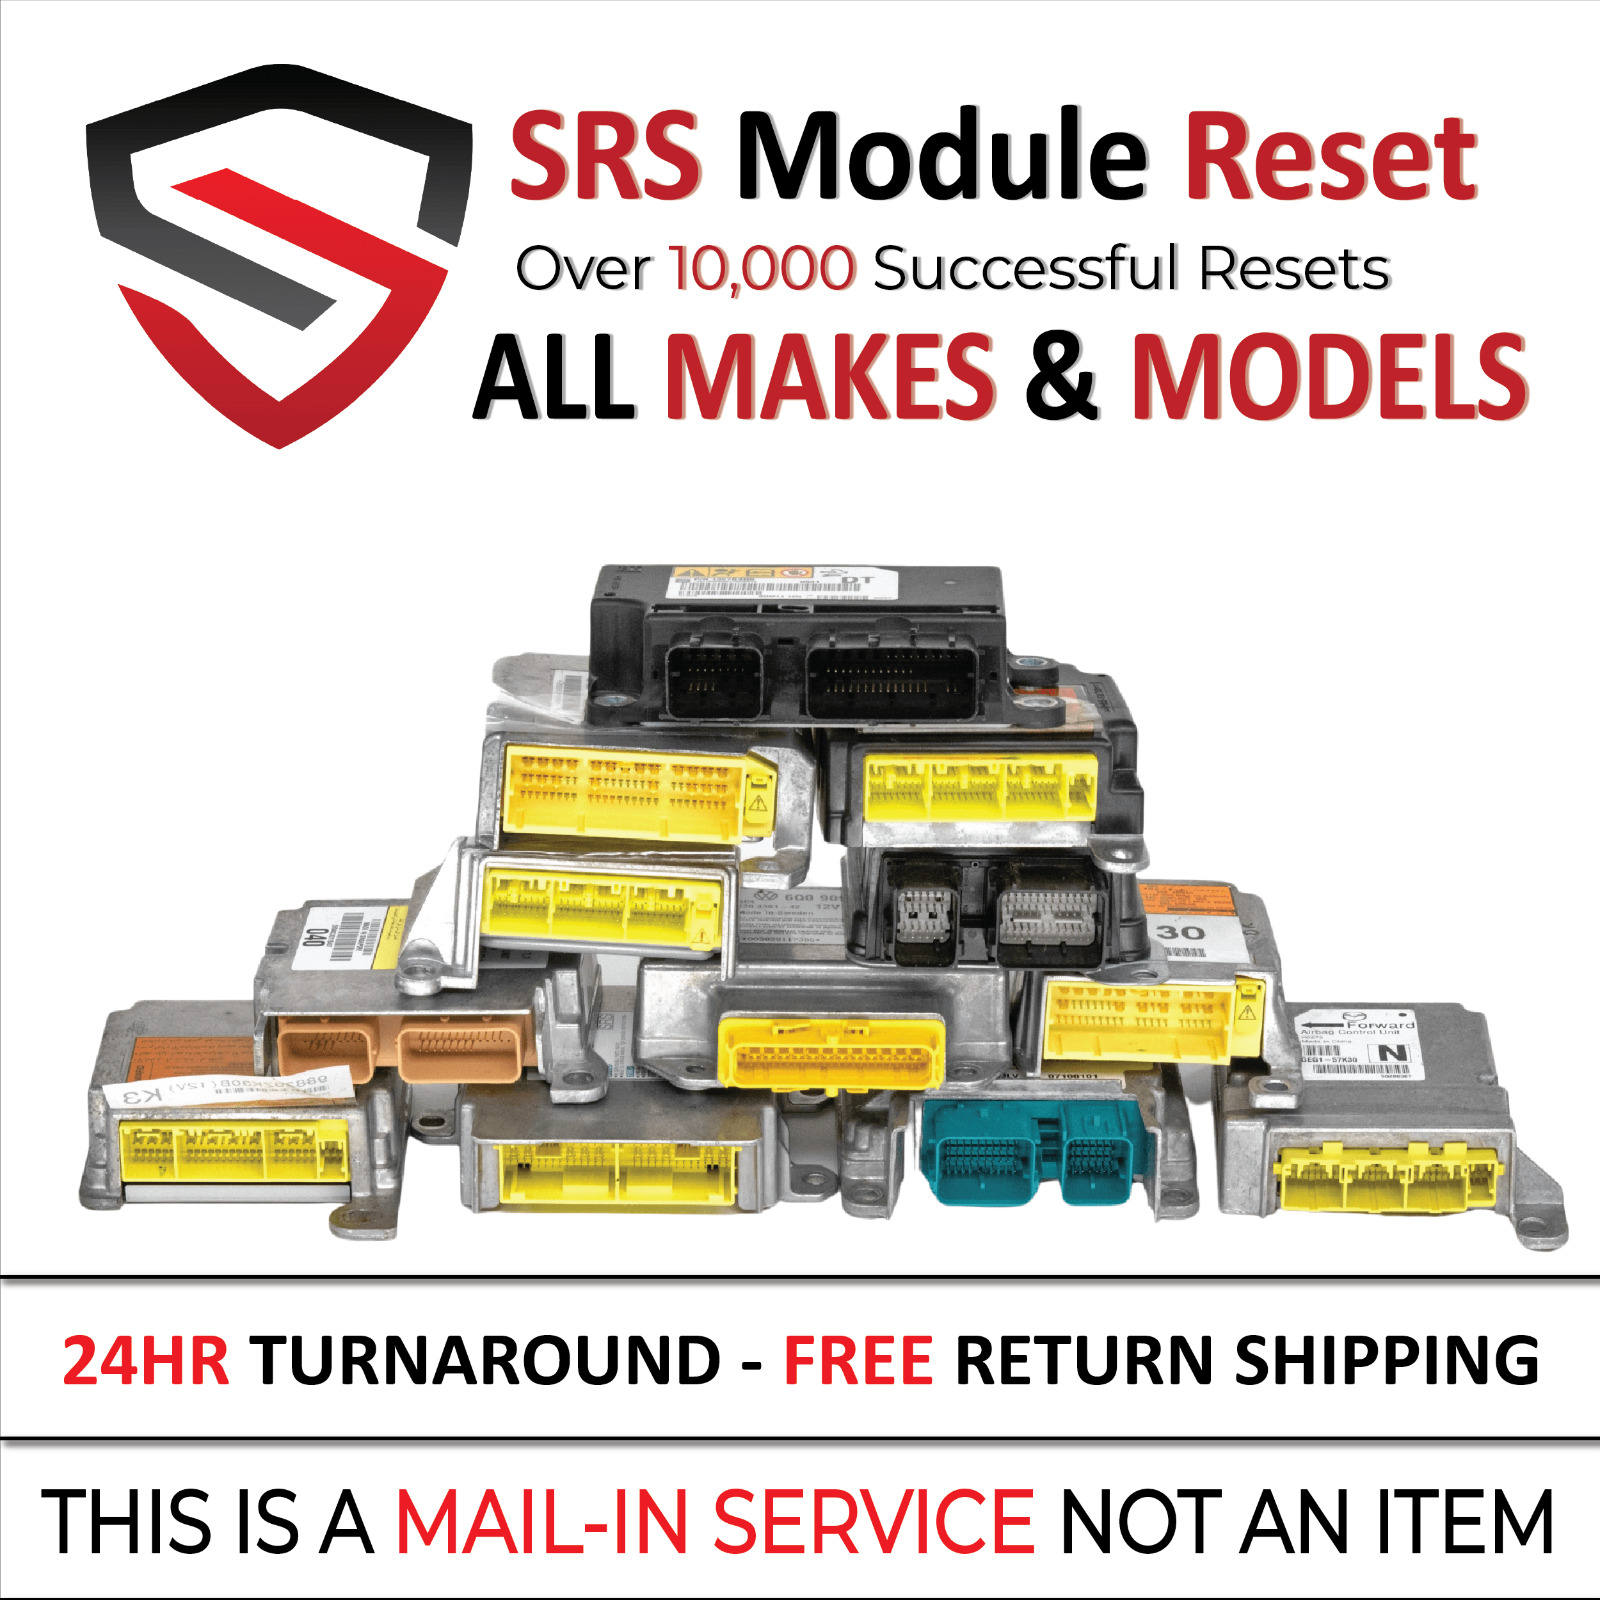 For Nissan SRS Module Reset Service - Guaranteed or Your Money Back